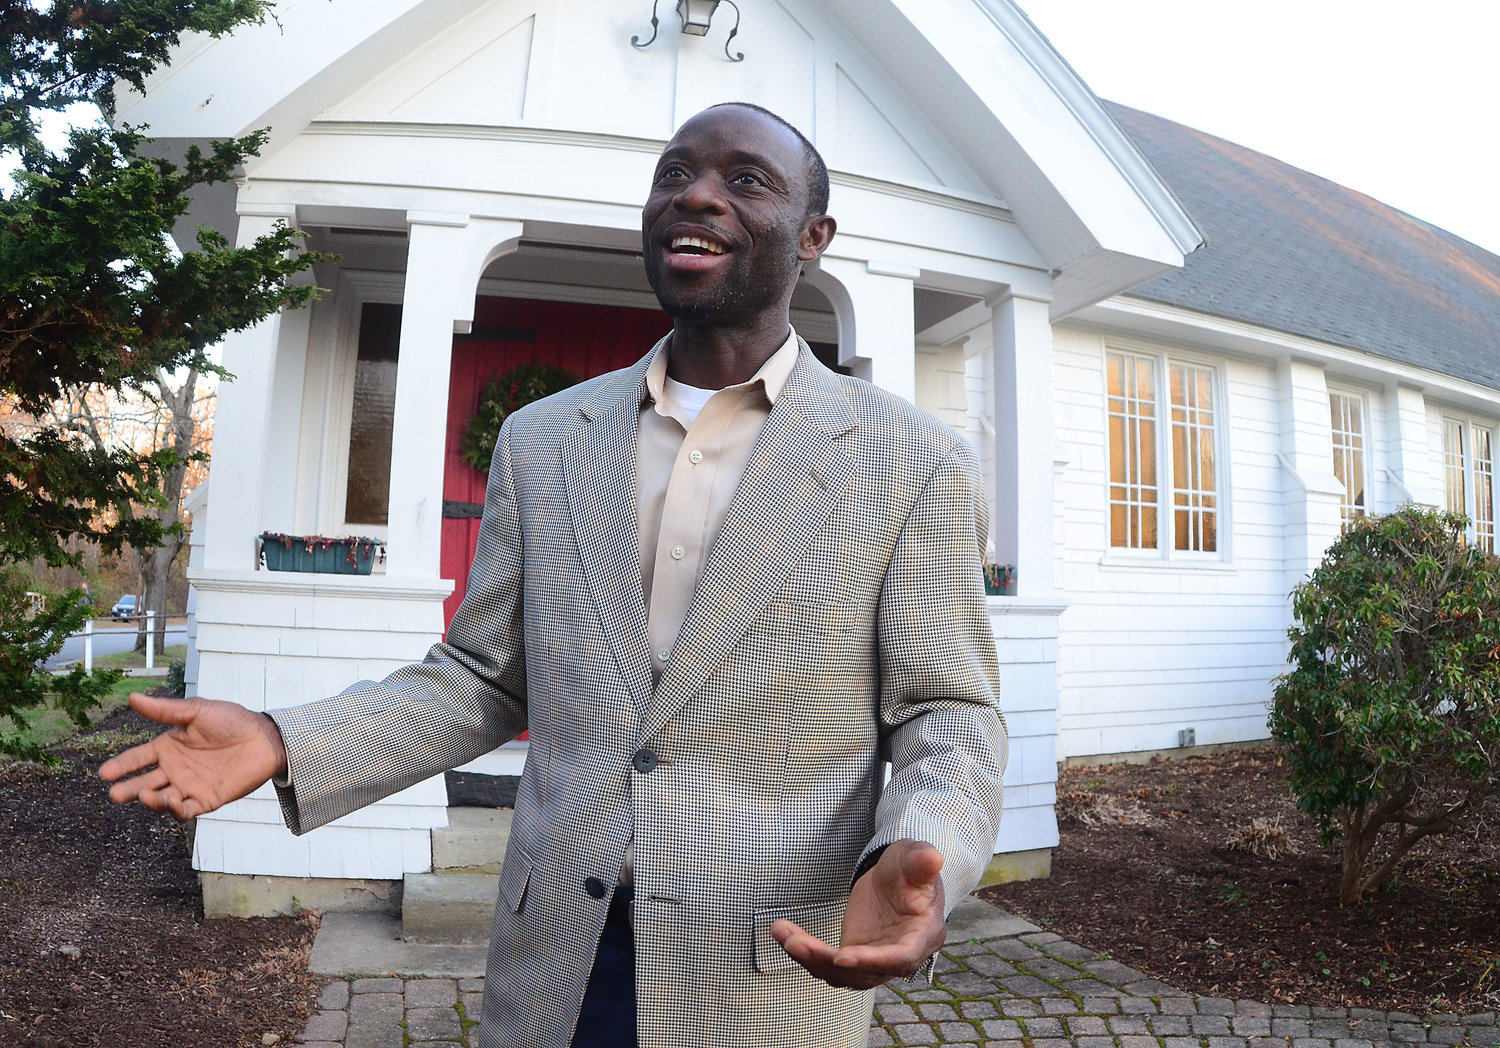 For the last five months, Michael Williams has served as the lay preacher at the Barrington United Methodist Church.